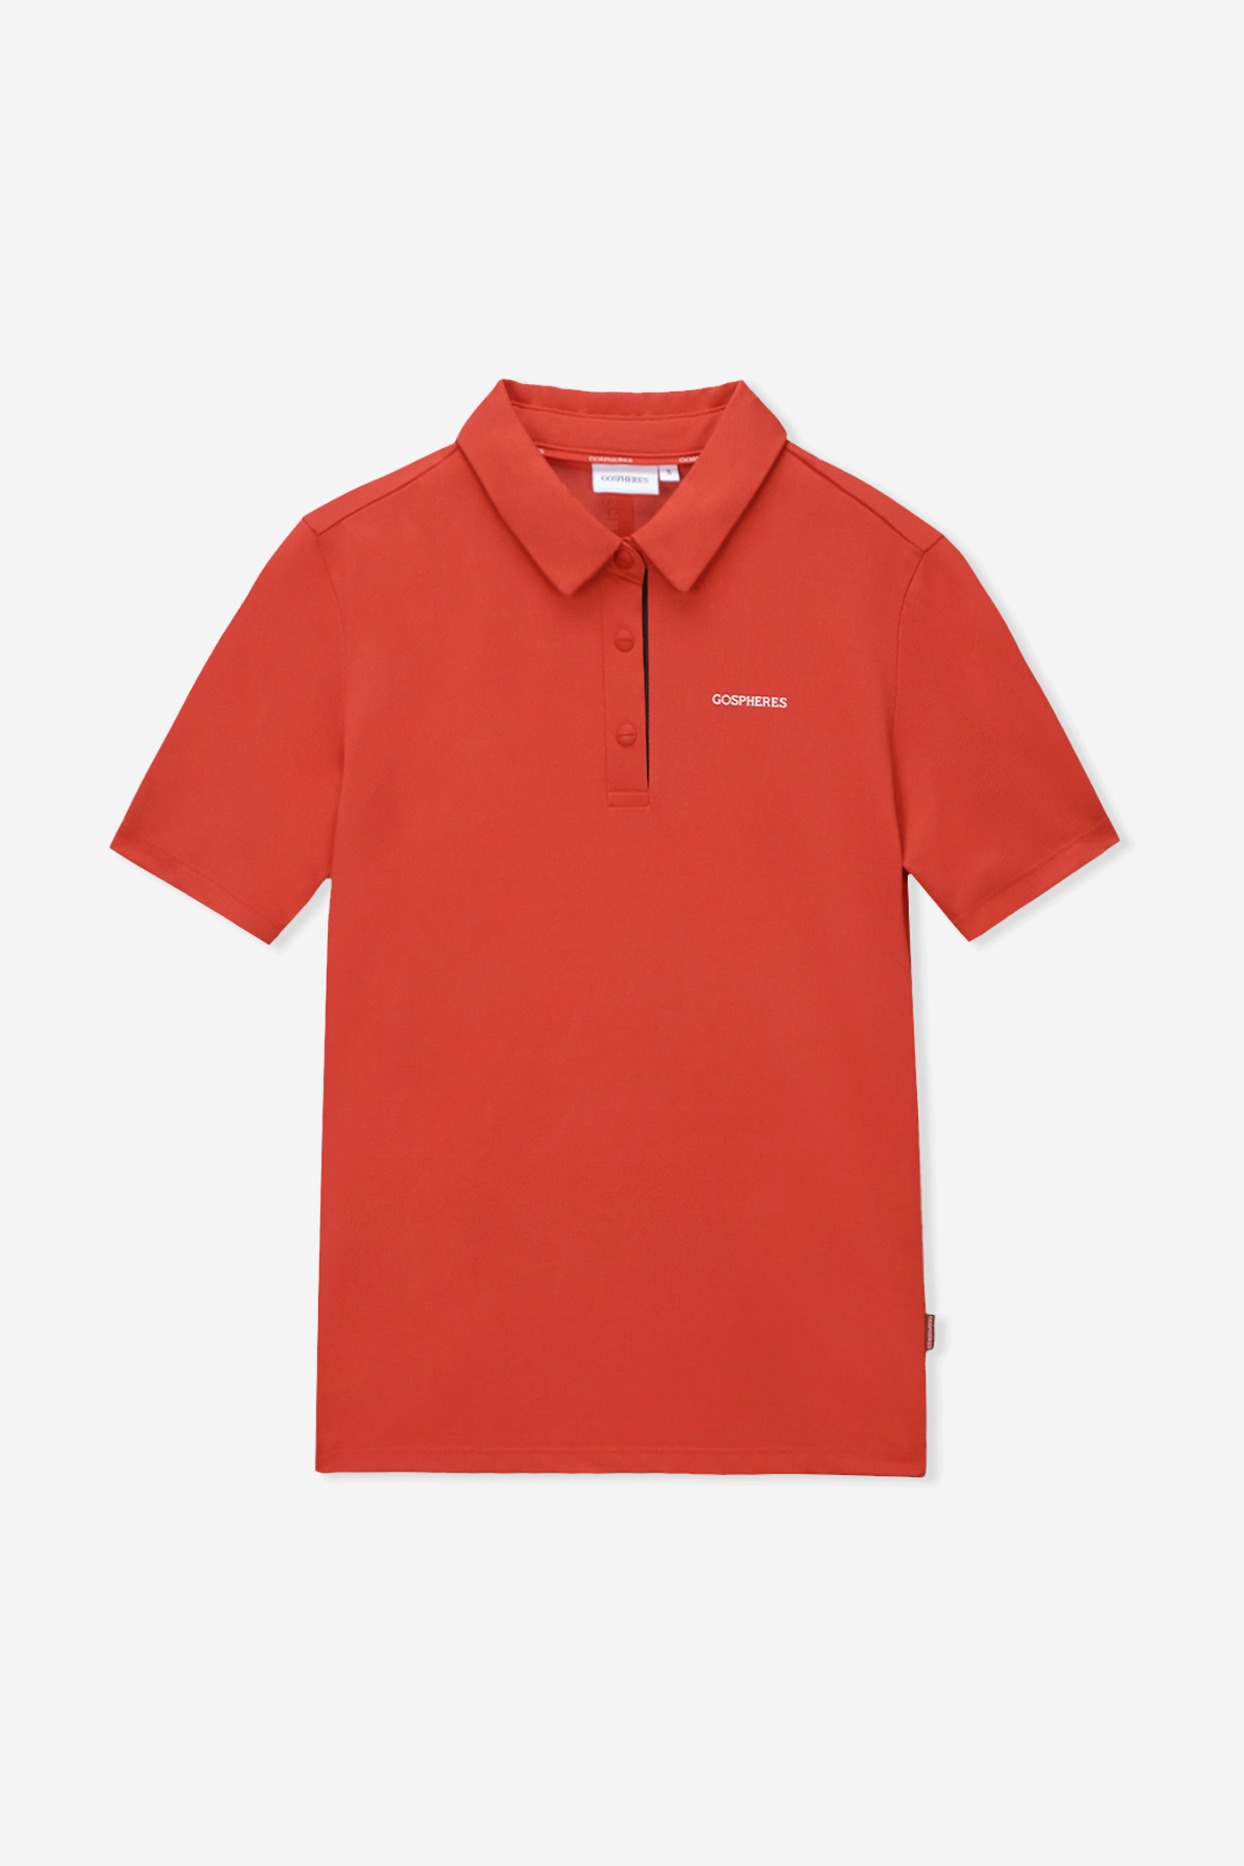 W CLASSIC PERFORMANCE POLO T-SHIRT RED